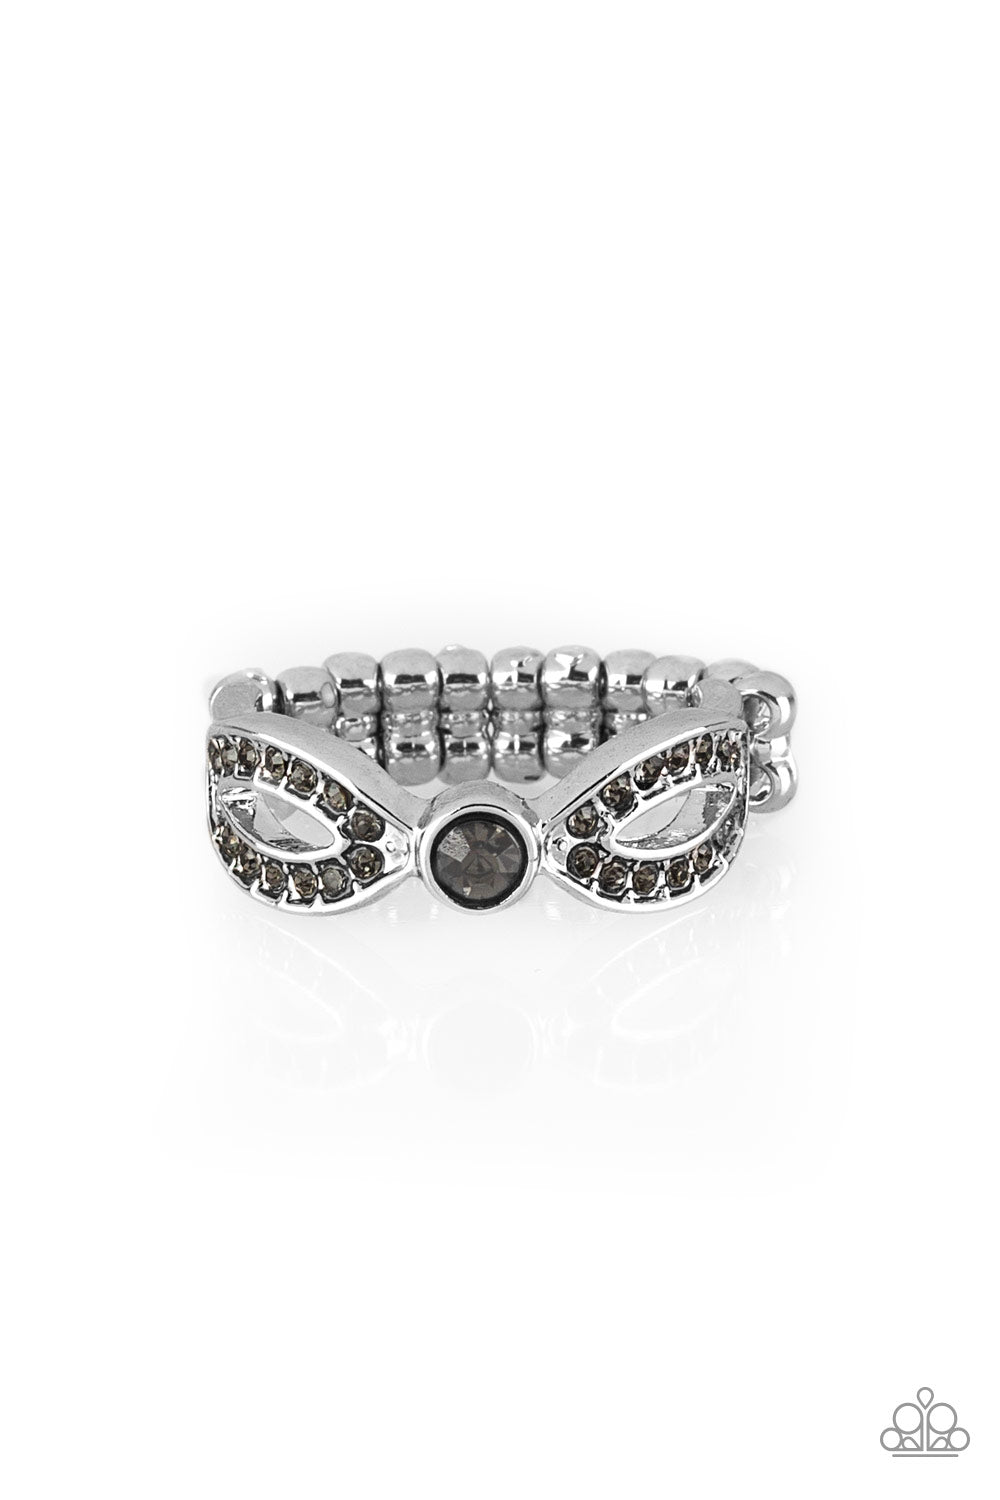 Extra Side Of Elegance - Silver Ring - Princess Glam Shop